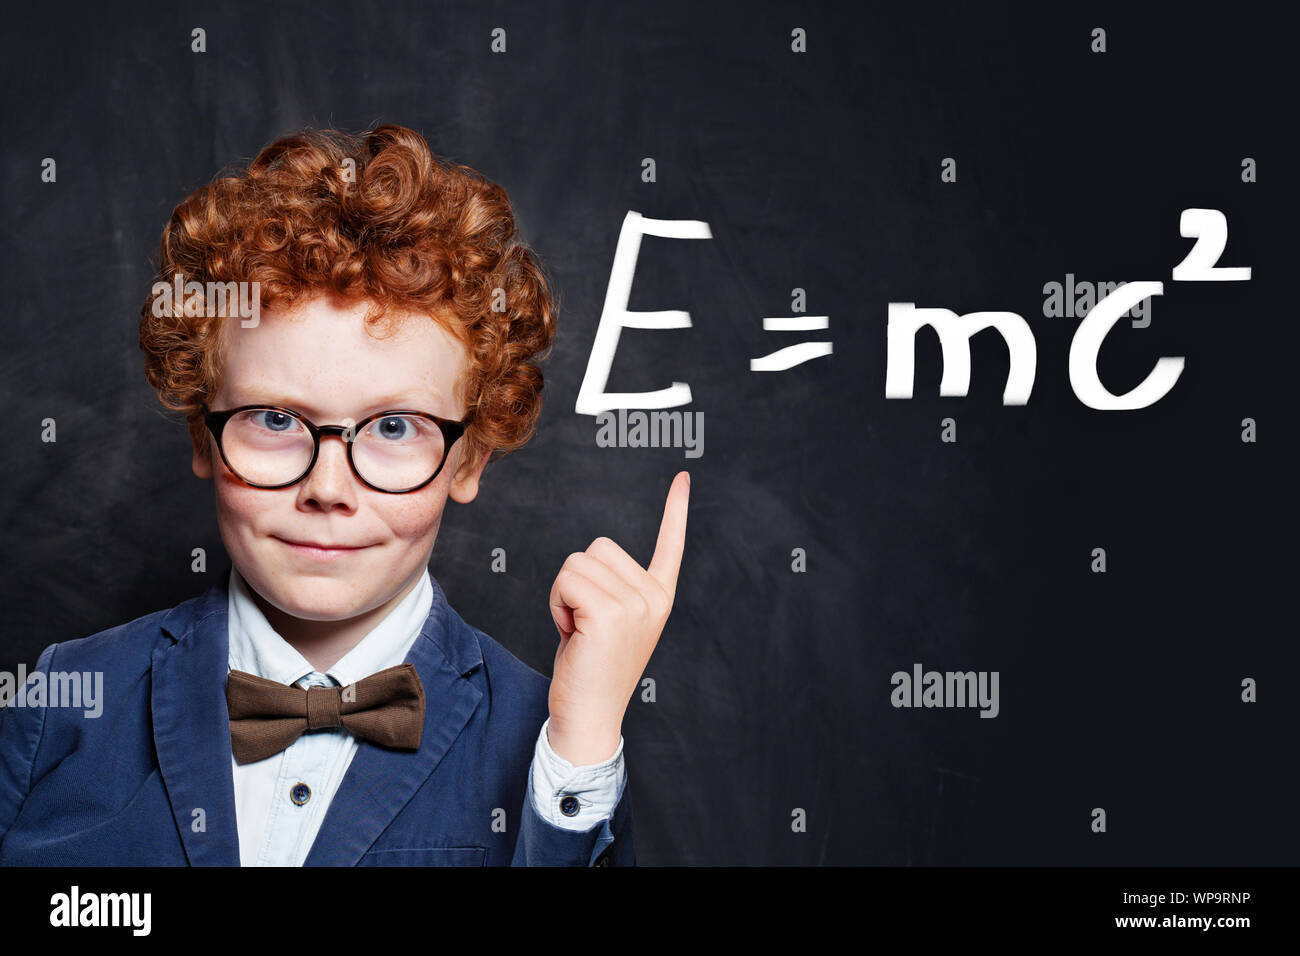 Confident child student on blackboard background pointing at science formula Stock Photo